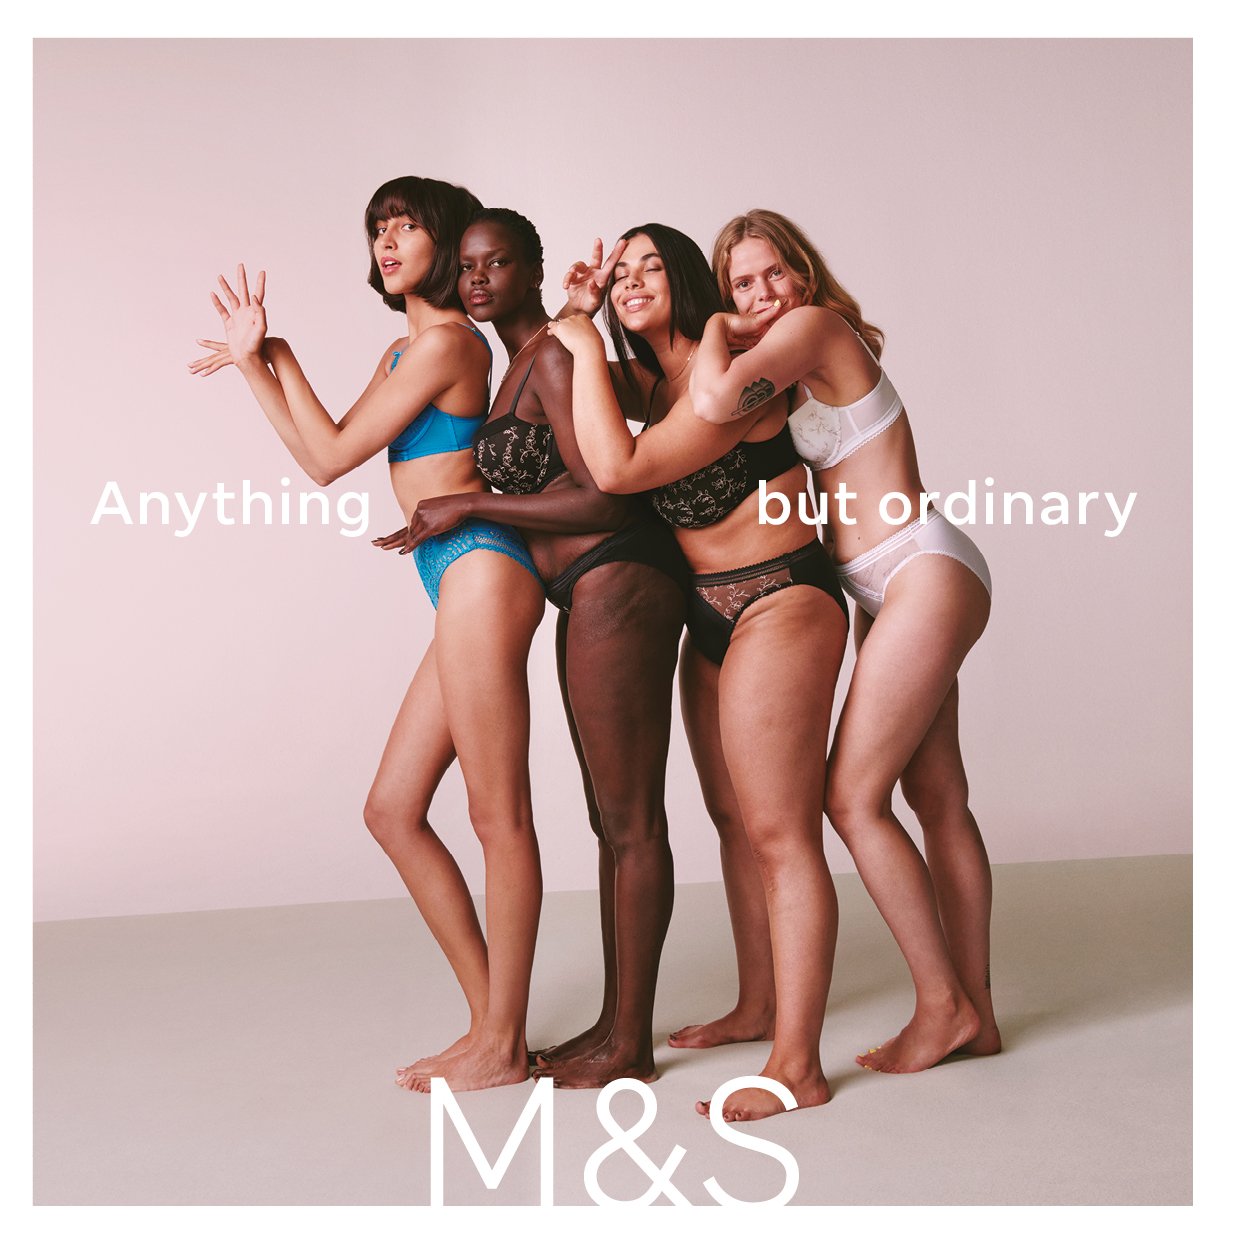 M&S / Anything but ordinary — Sally Green / Creative Director